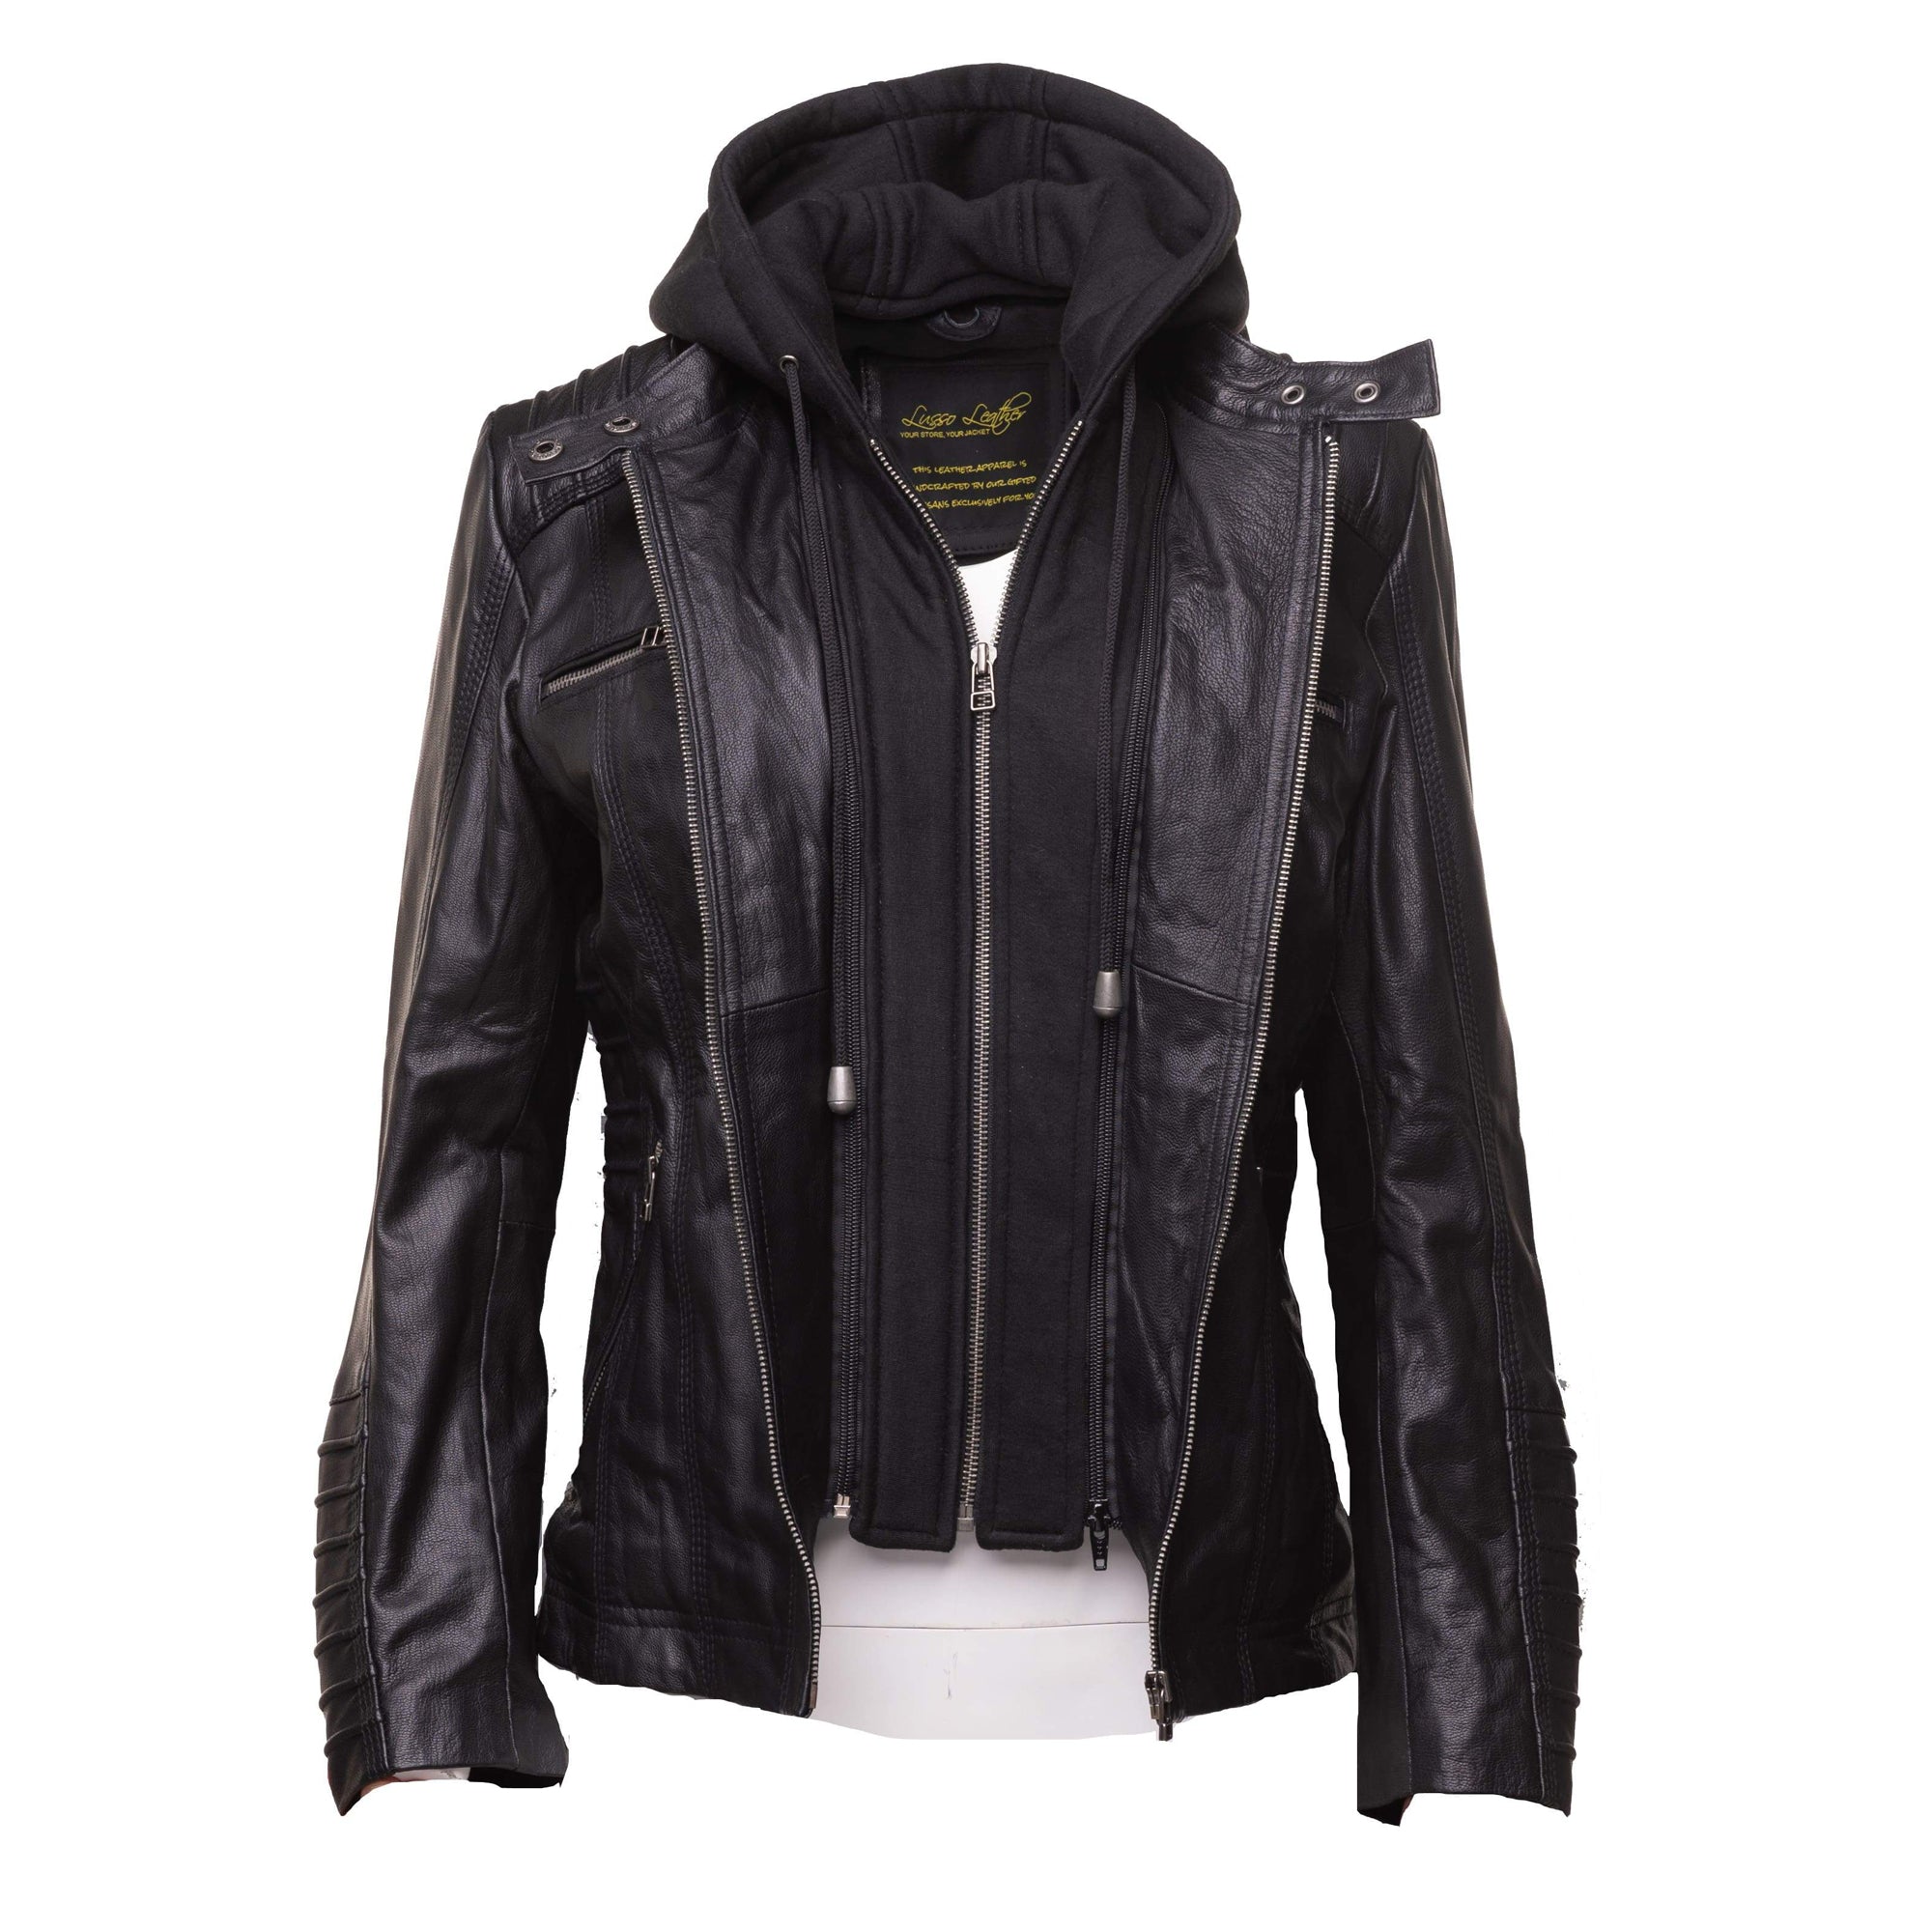 Women's black leather jacket with piping details – Lusso Leather